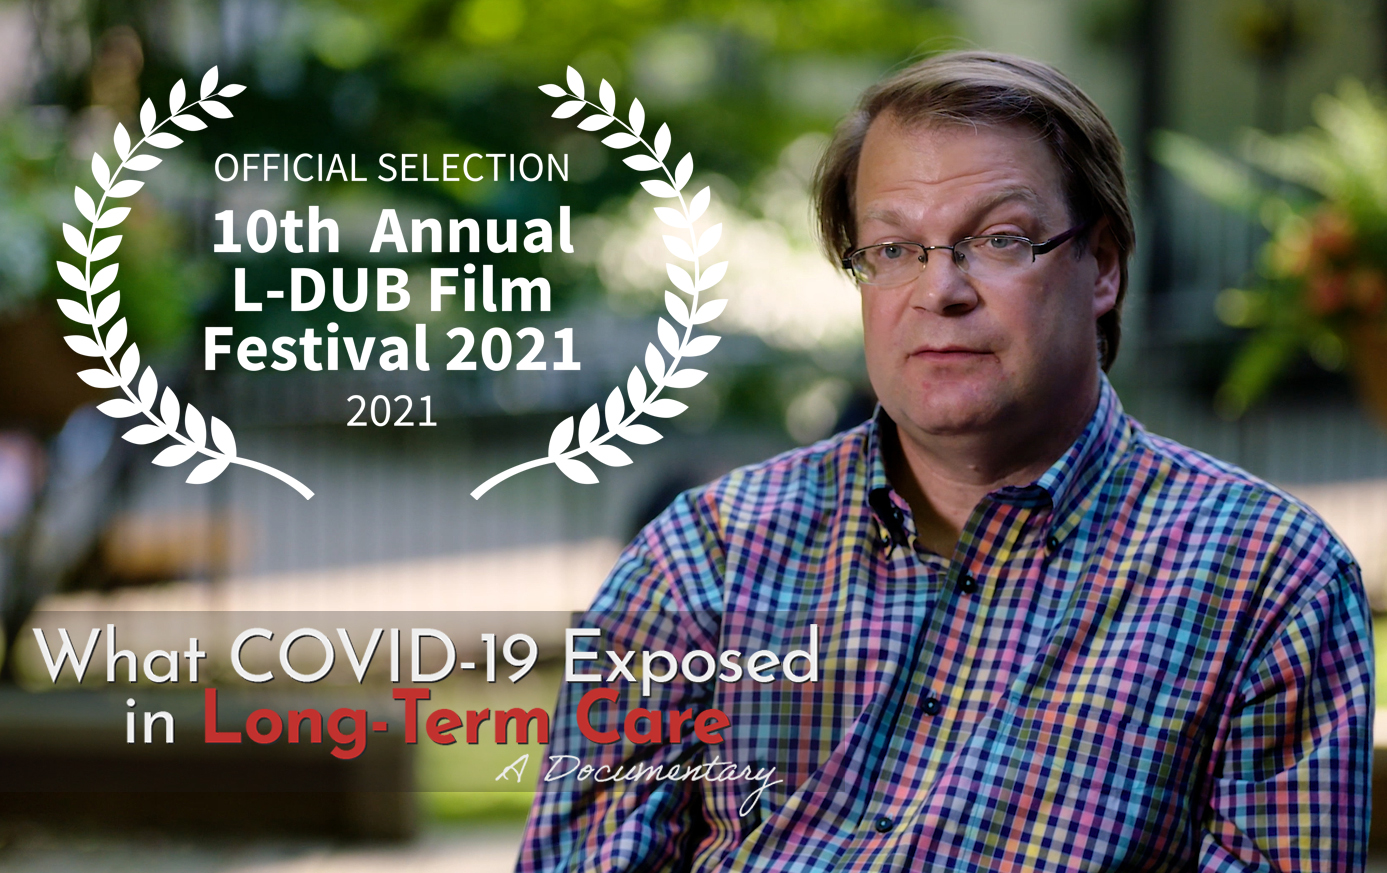 Official Selection for the 10th Annual L-DUB Film Festival 2021: What COVID-19 Exposed in Long-Term Care